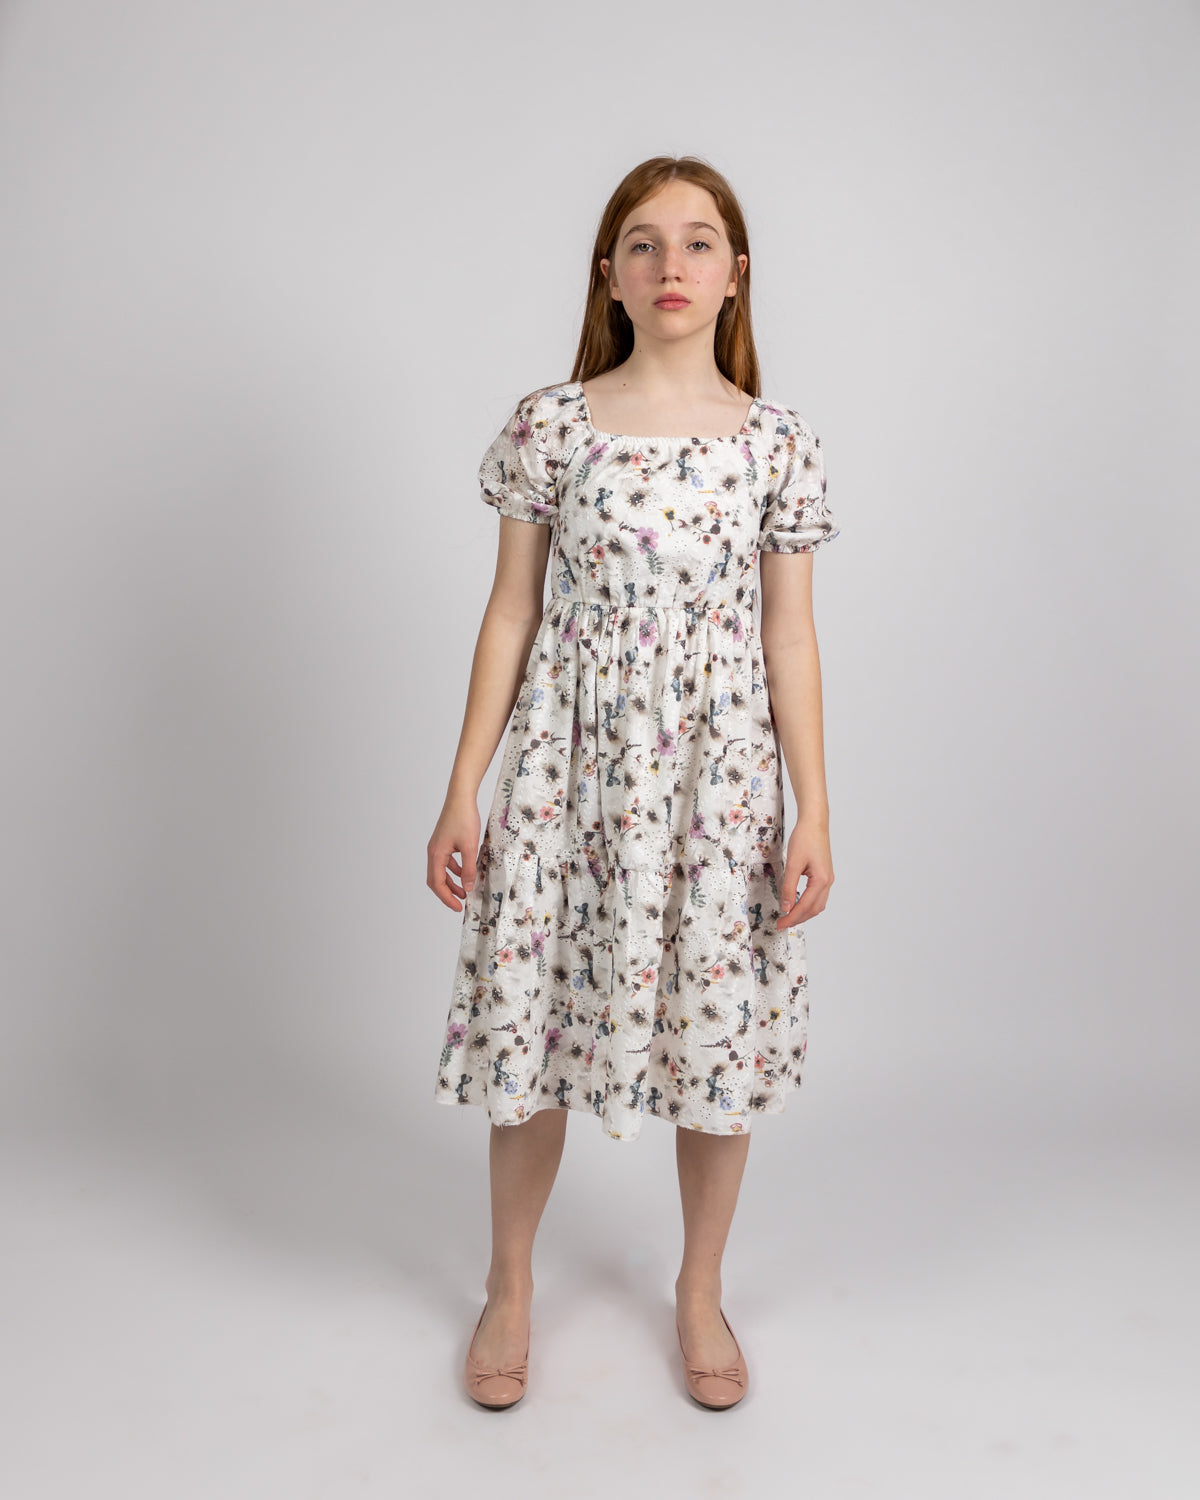 Floral Broderie Anglaise Dress For Girls - Multicolored